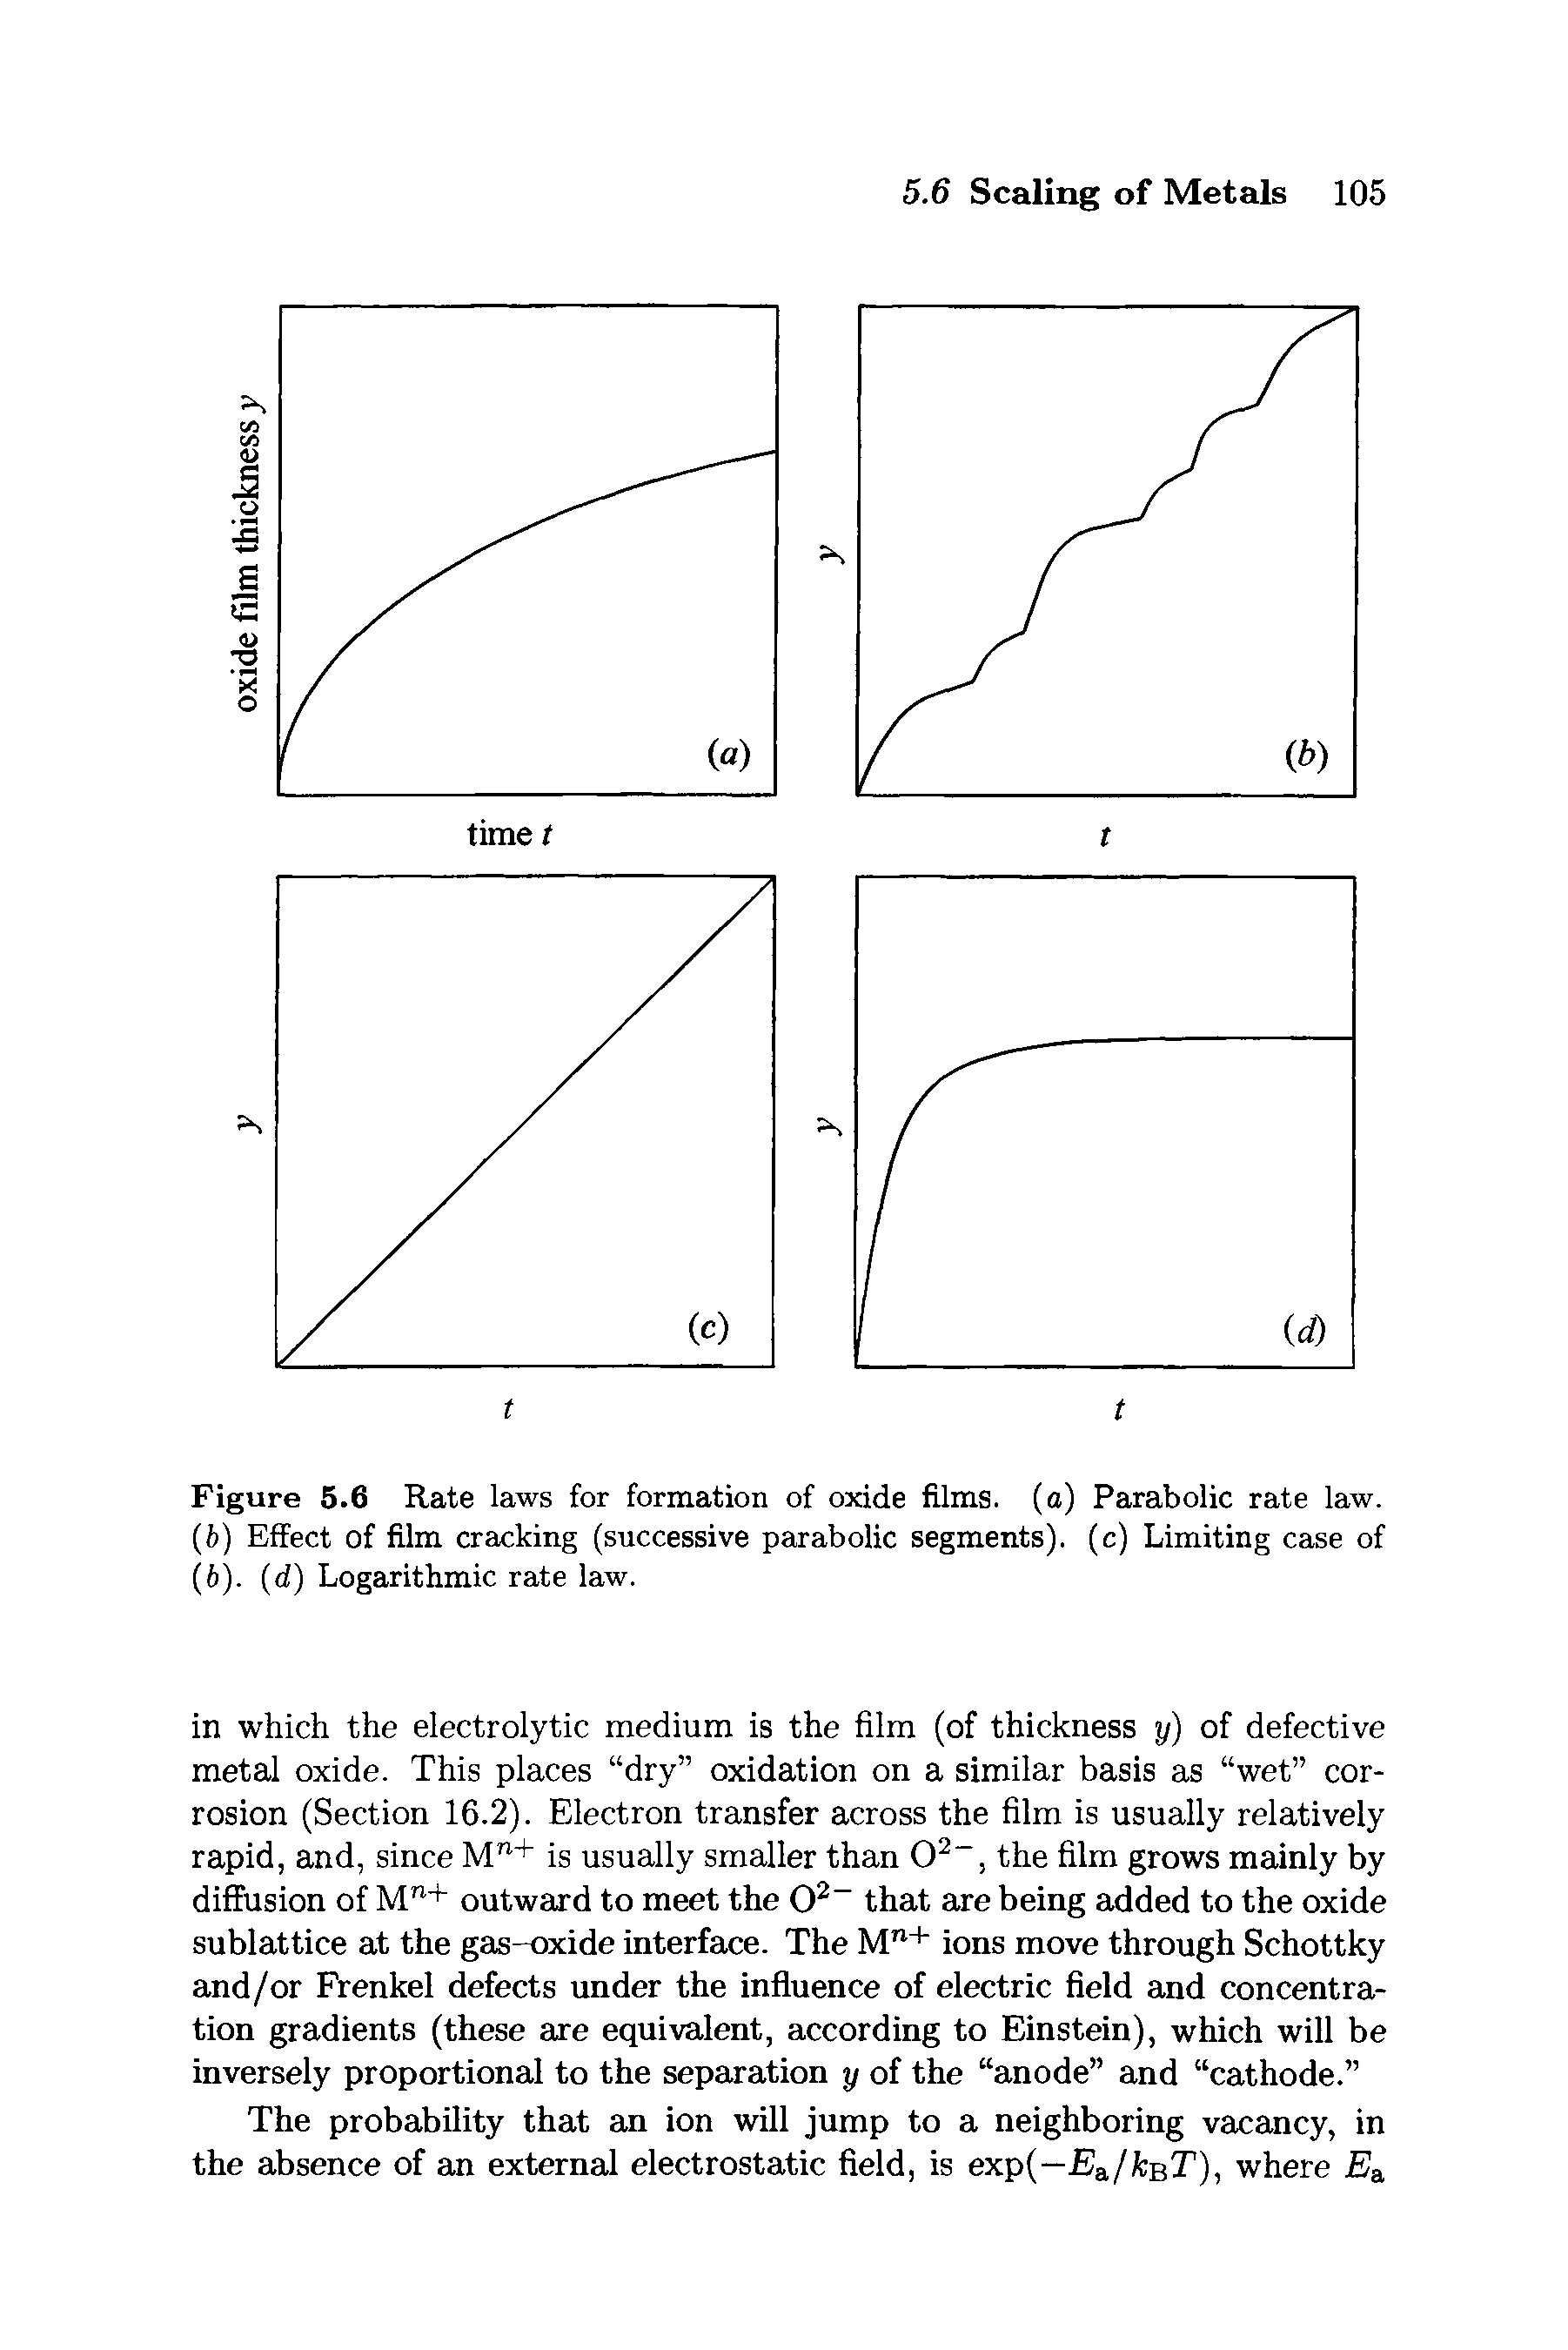 Figure 5.6 Rate laws for formation of oxide films, (a) Parabolic rate law. (b) Effect of film cracking (successive parabolic segments), (c) Limiting case of (6). (d) Logarithmic rate law.